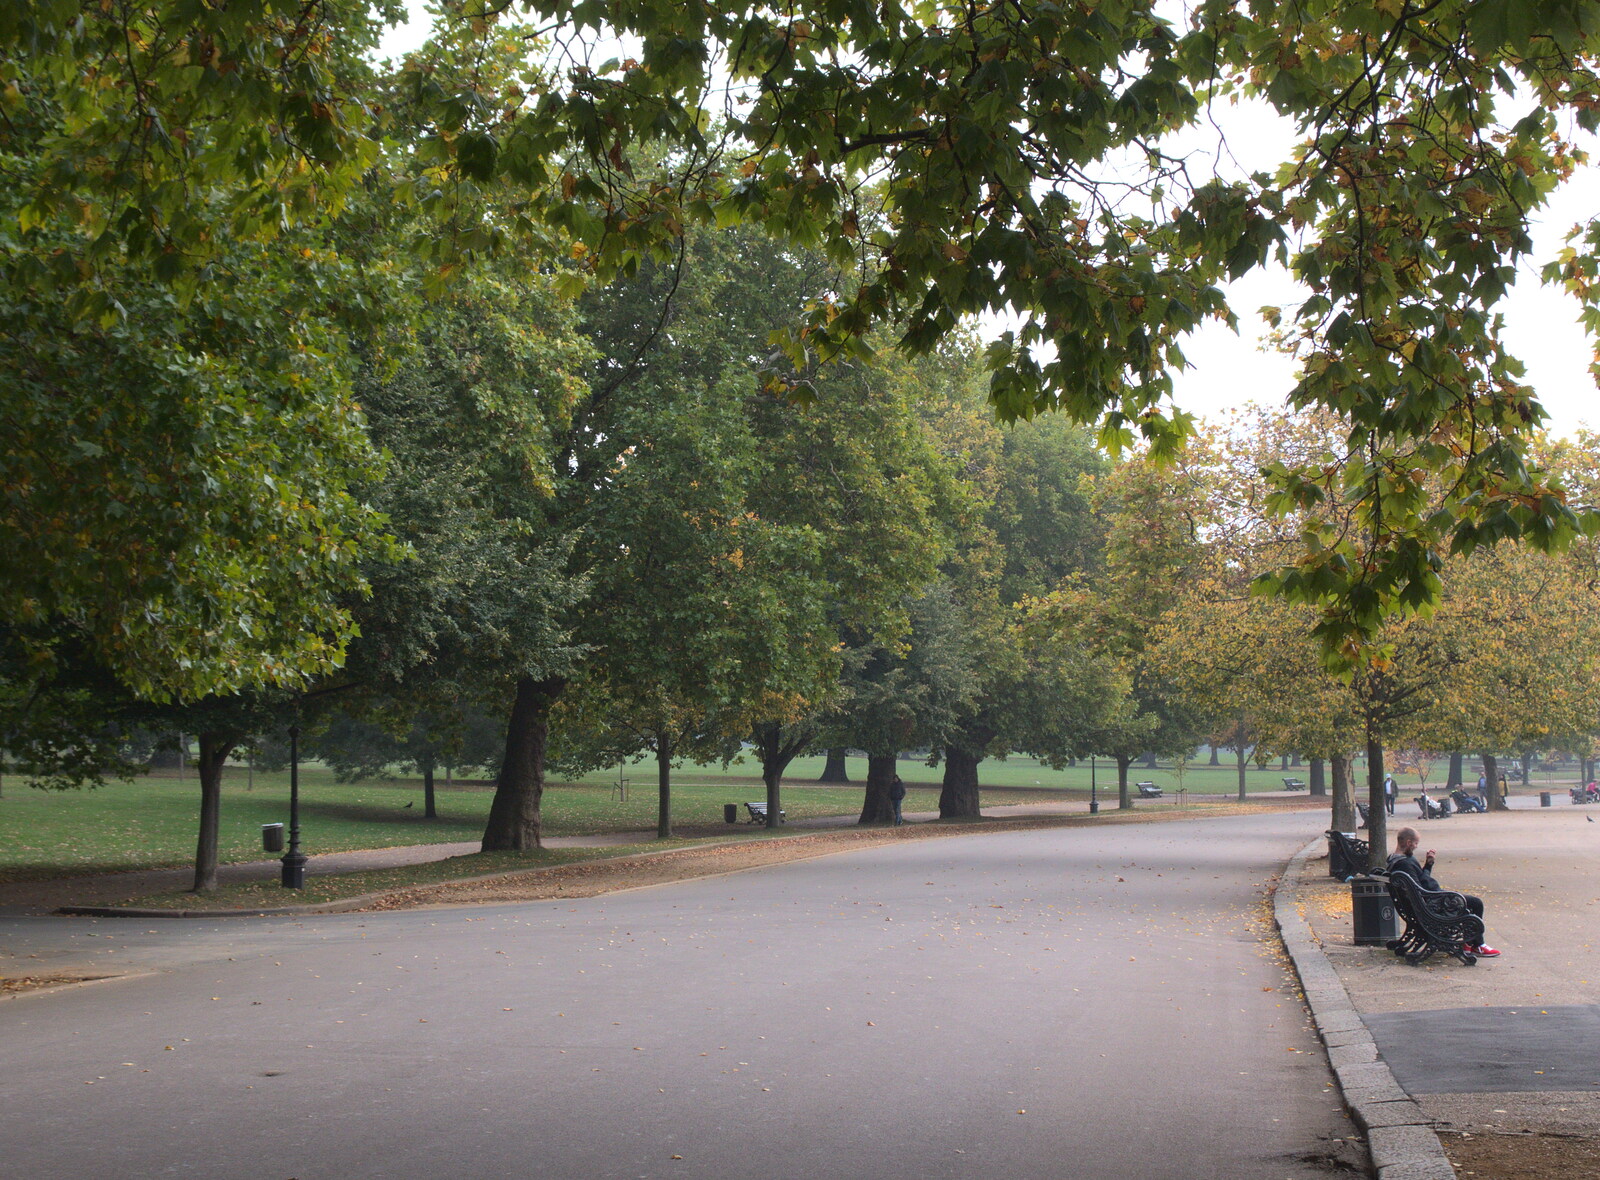 Looking back along Serpentine Road from Hyde Park and Carpets, London and Diss - 20th September 2017